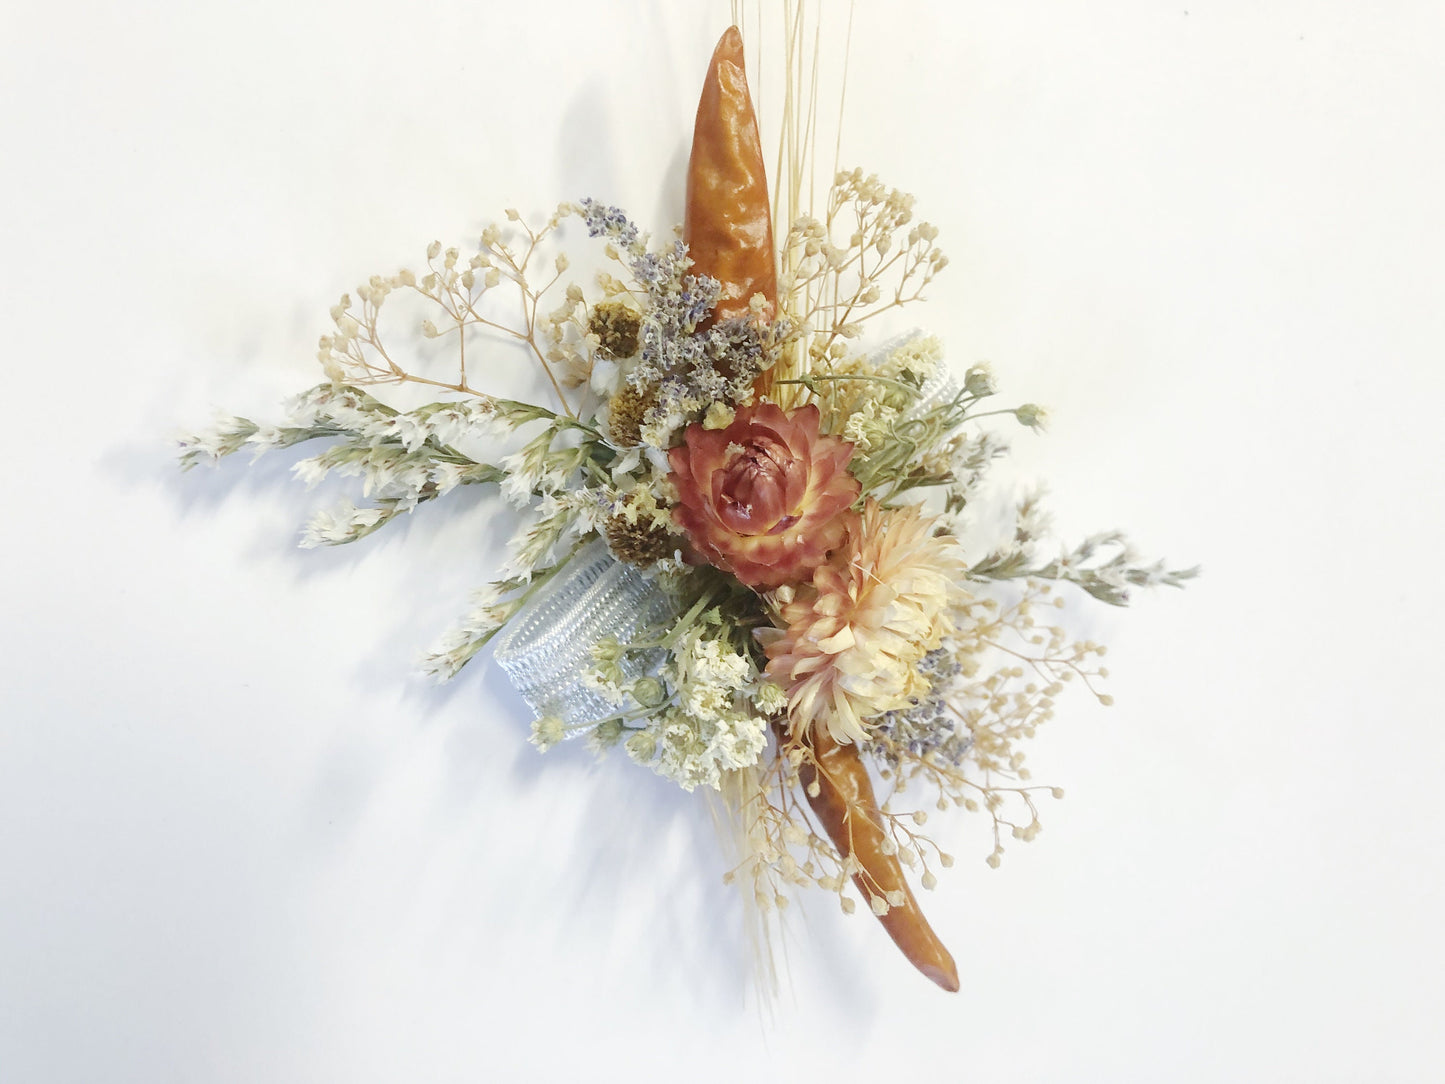 Corsage, wedding accessories, prom, floral corsage, dried flowers, preserved flowers, rubber band, natural, simple, vintage